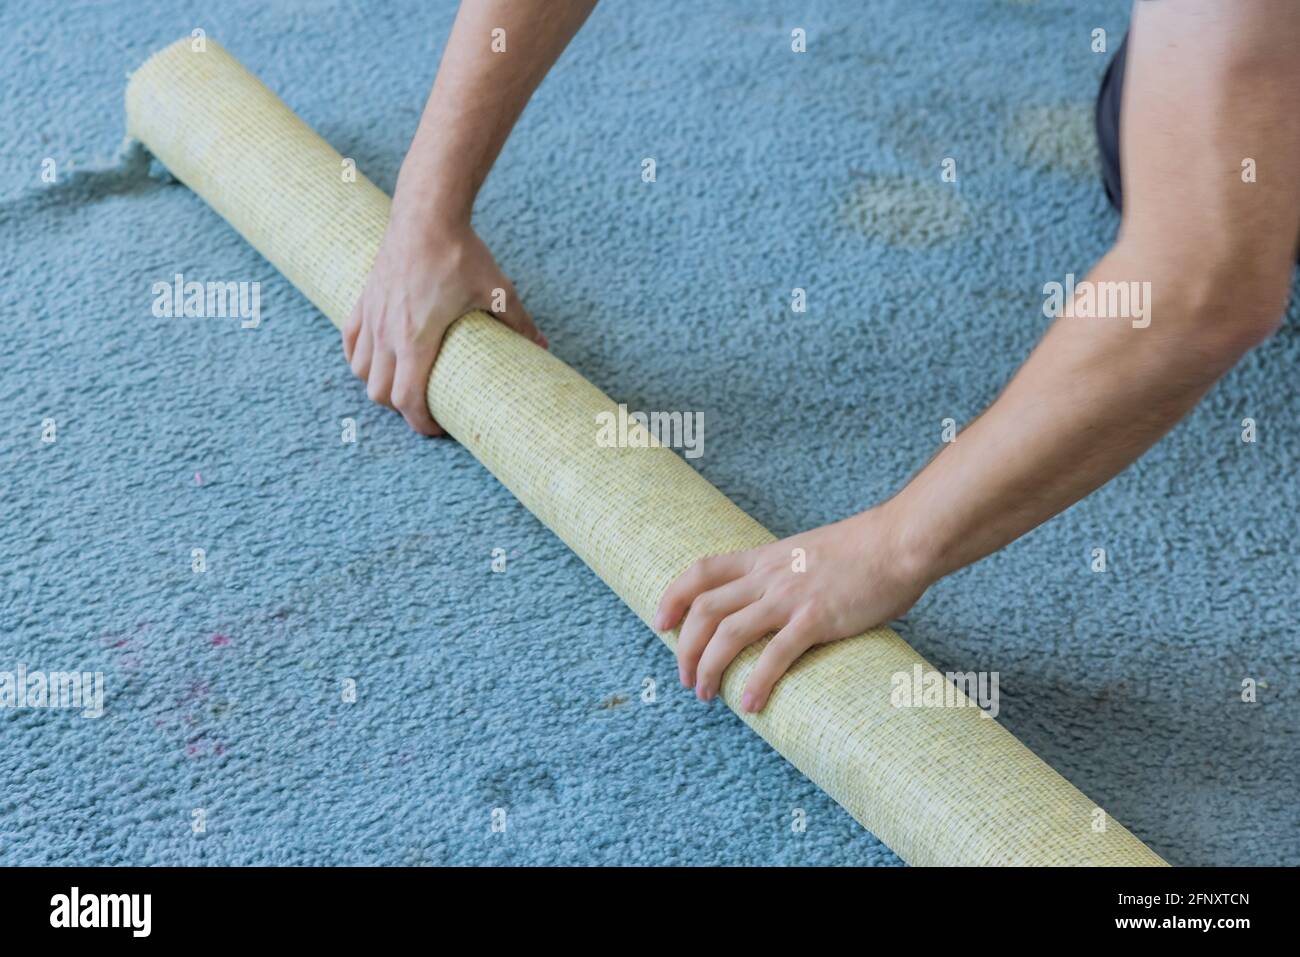 Removing a carpet for renovation works in the apartment Stock Photo